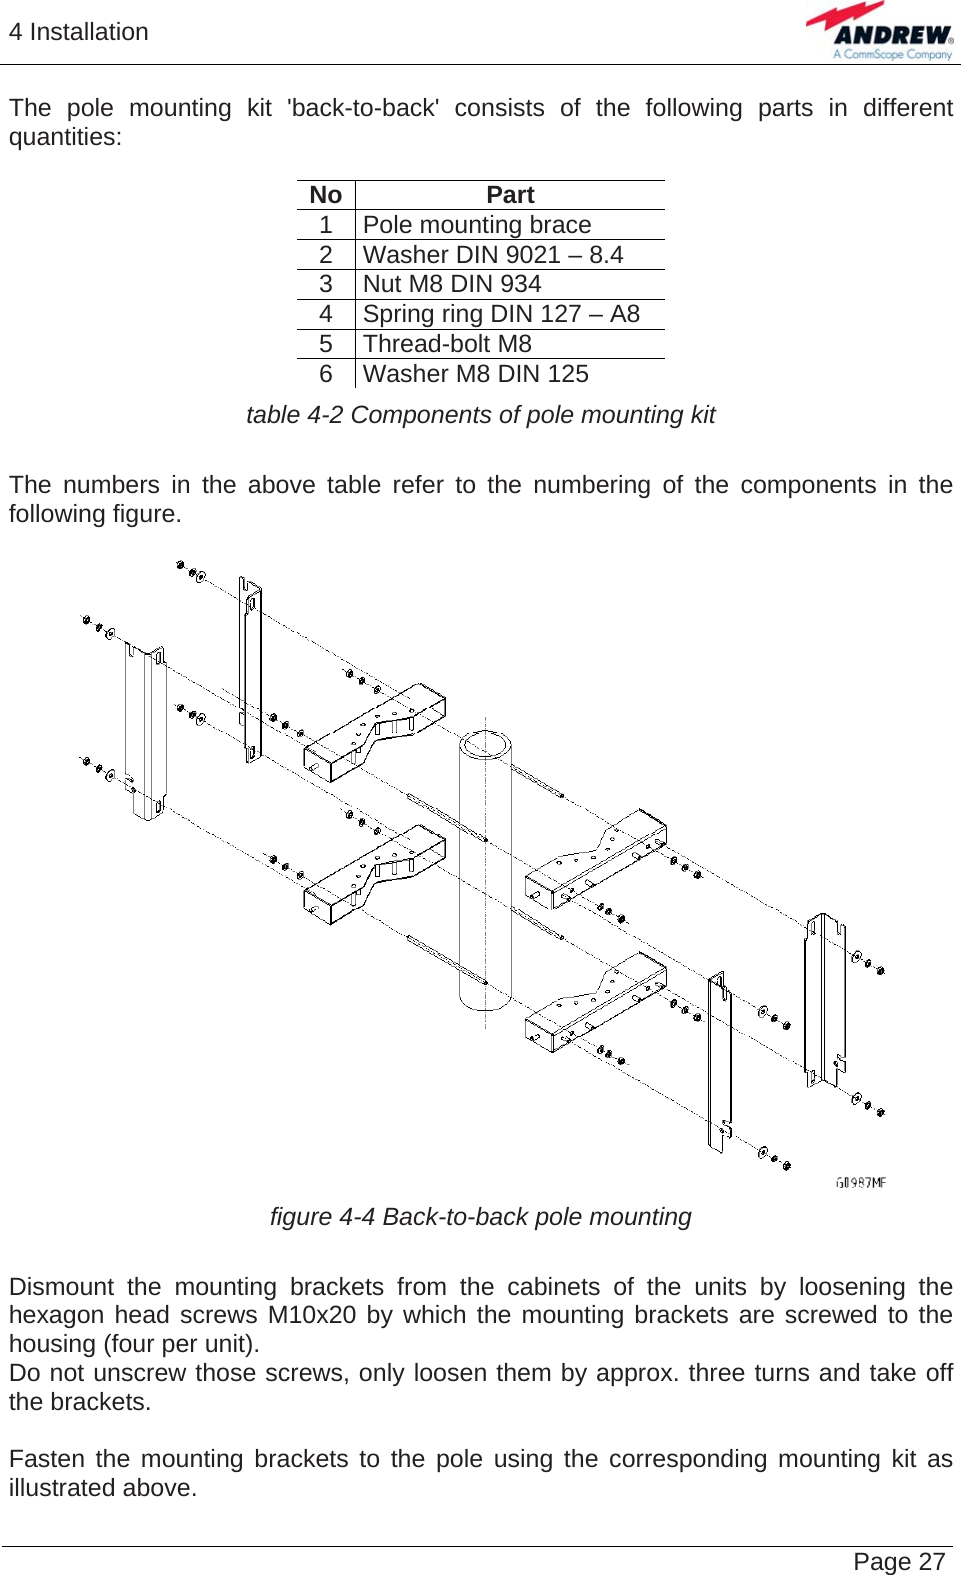 4 Installation   Page 27The pole mounting kit &apos;back-to-back&apos; consists of the following parts in different quantities:  No Part 1  Pole mounting brace 2  Washer DIN 9021 – 8.4 3  Nut M8 DIN 934 4  Spring ring DIN 127 – A8 5 Thread-bolt M8 6  Washer M8 DIN 125 table 4-2 Components of pole mounting kit  The numbers in the above table refer to the numbering of the components in the following figure.   figure 4-4 Back-to-back pole mounting  Dismount the mounting brackets from the cabinets of the units by loosening the hexagon head screws M10x20 by which the mounting brackets are screwed to the housing (four per unit). Do not unscrew those screws, only loosen them by approx. three turns and take off the brackets.   Fasten the mounting brackets to the pole using the corresponding mounting kit as illustrated above.  